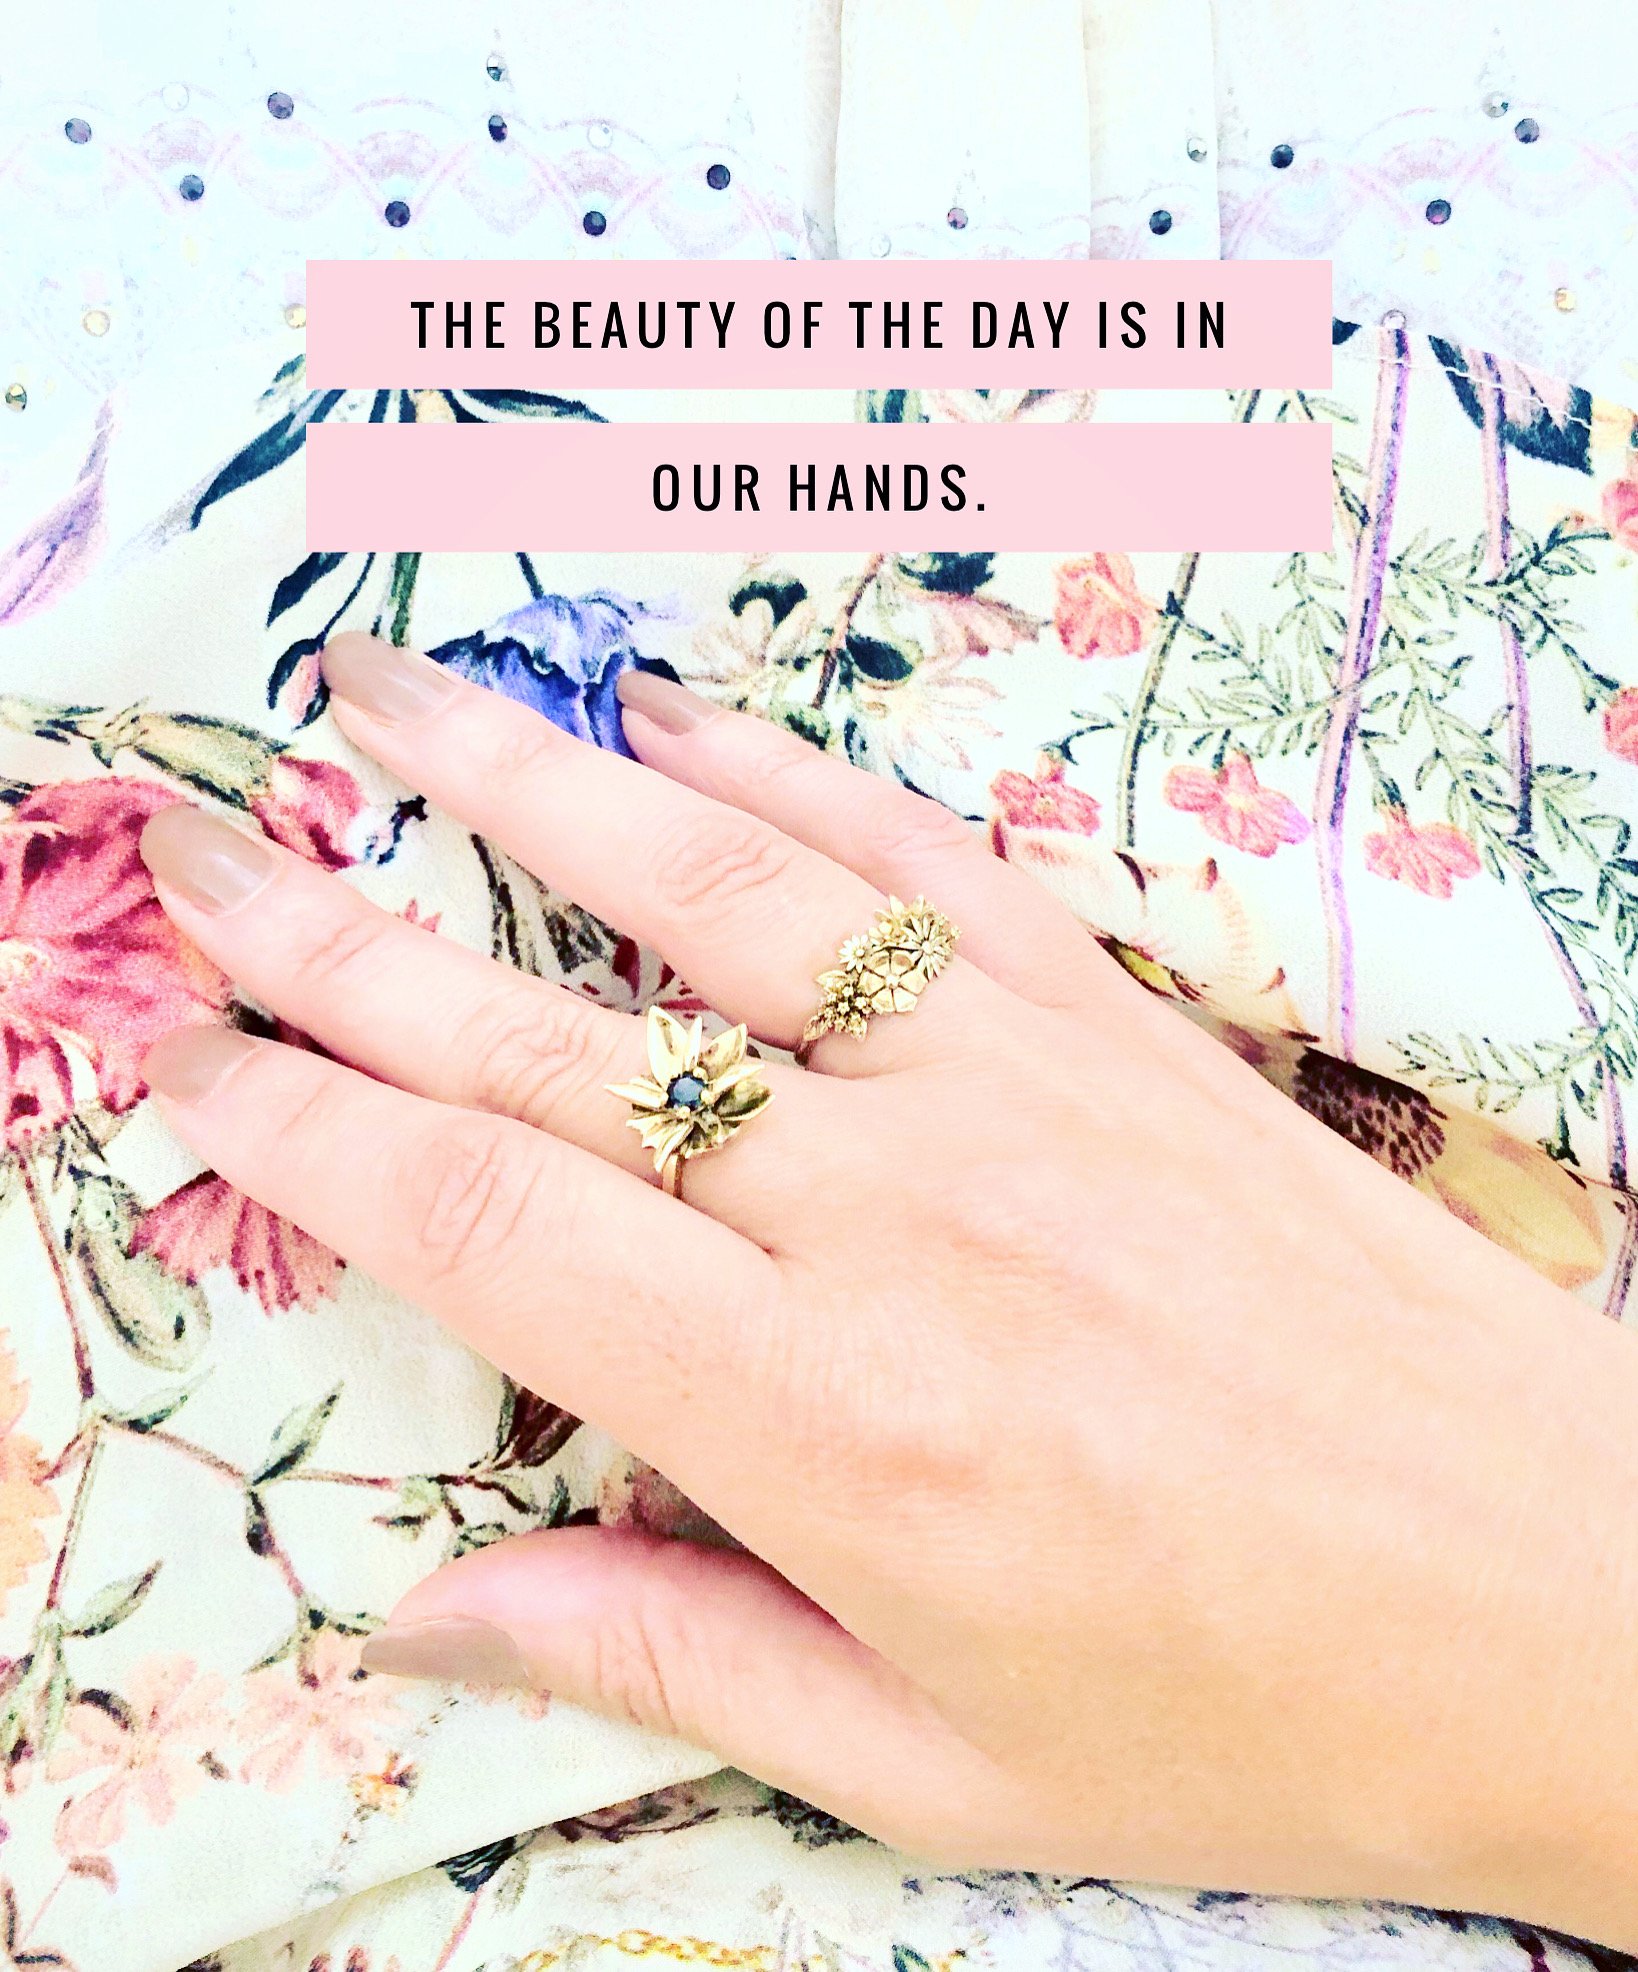 The beauty of the day is in our hands.